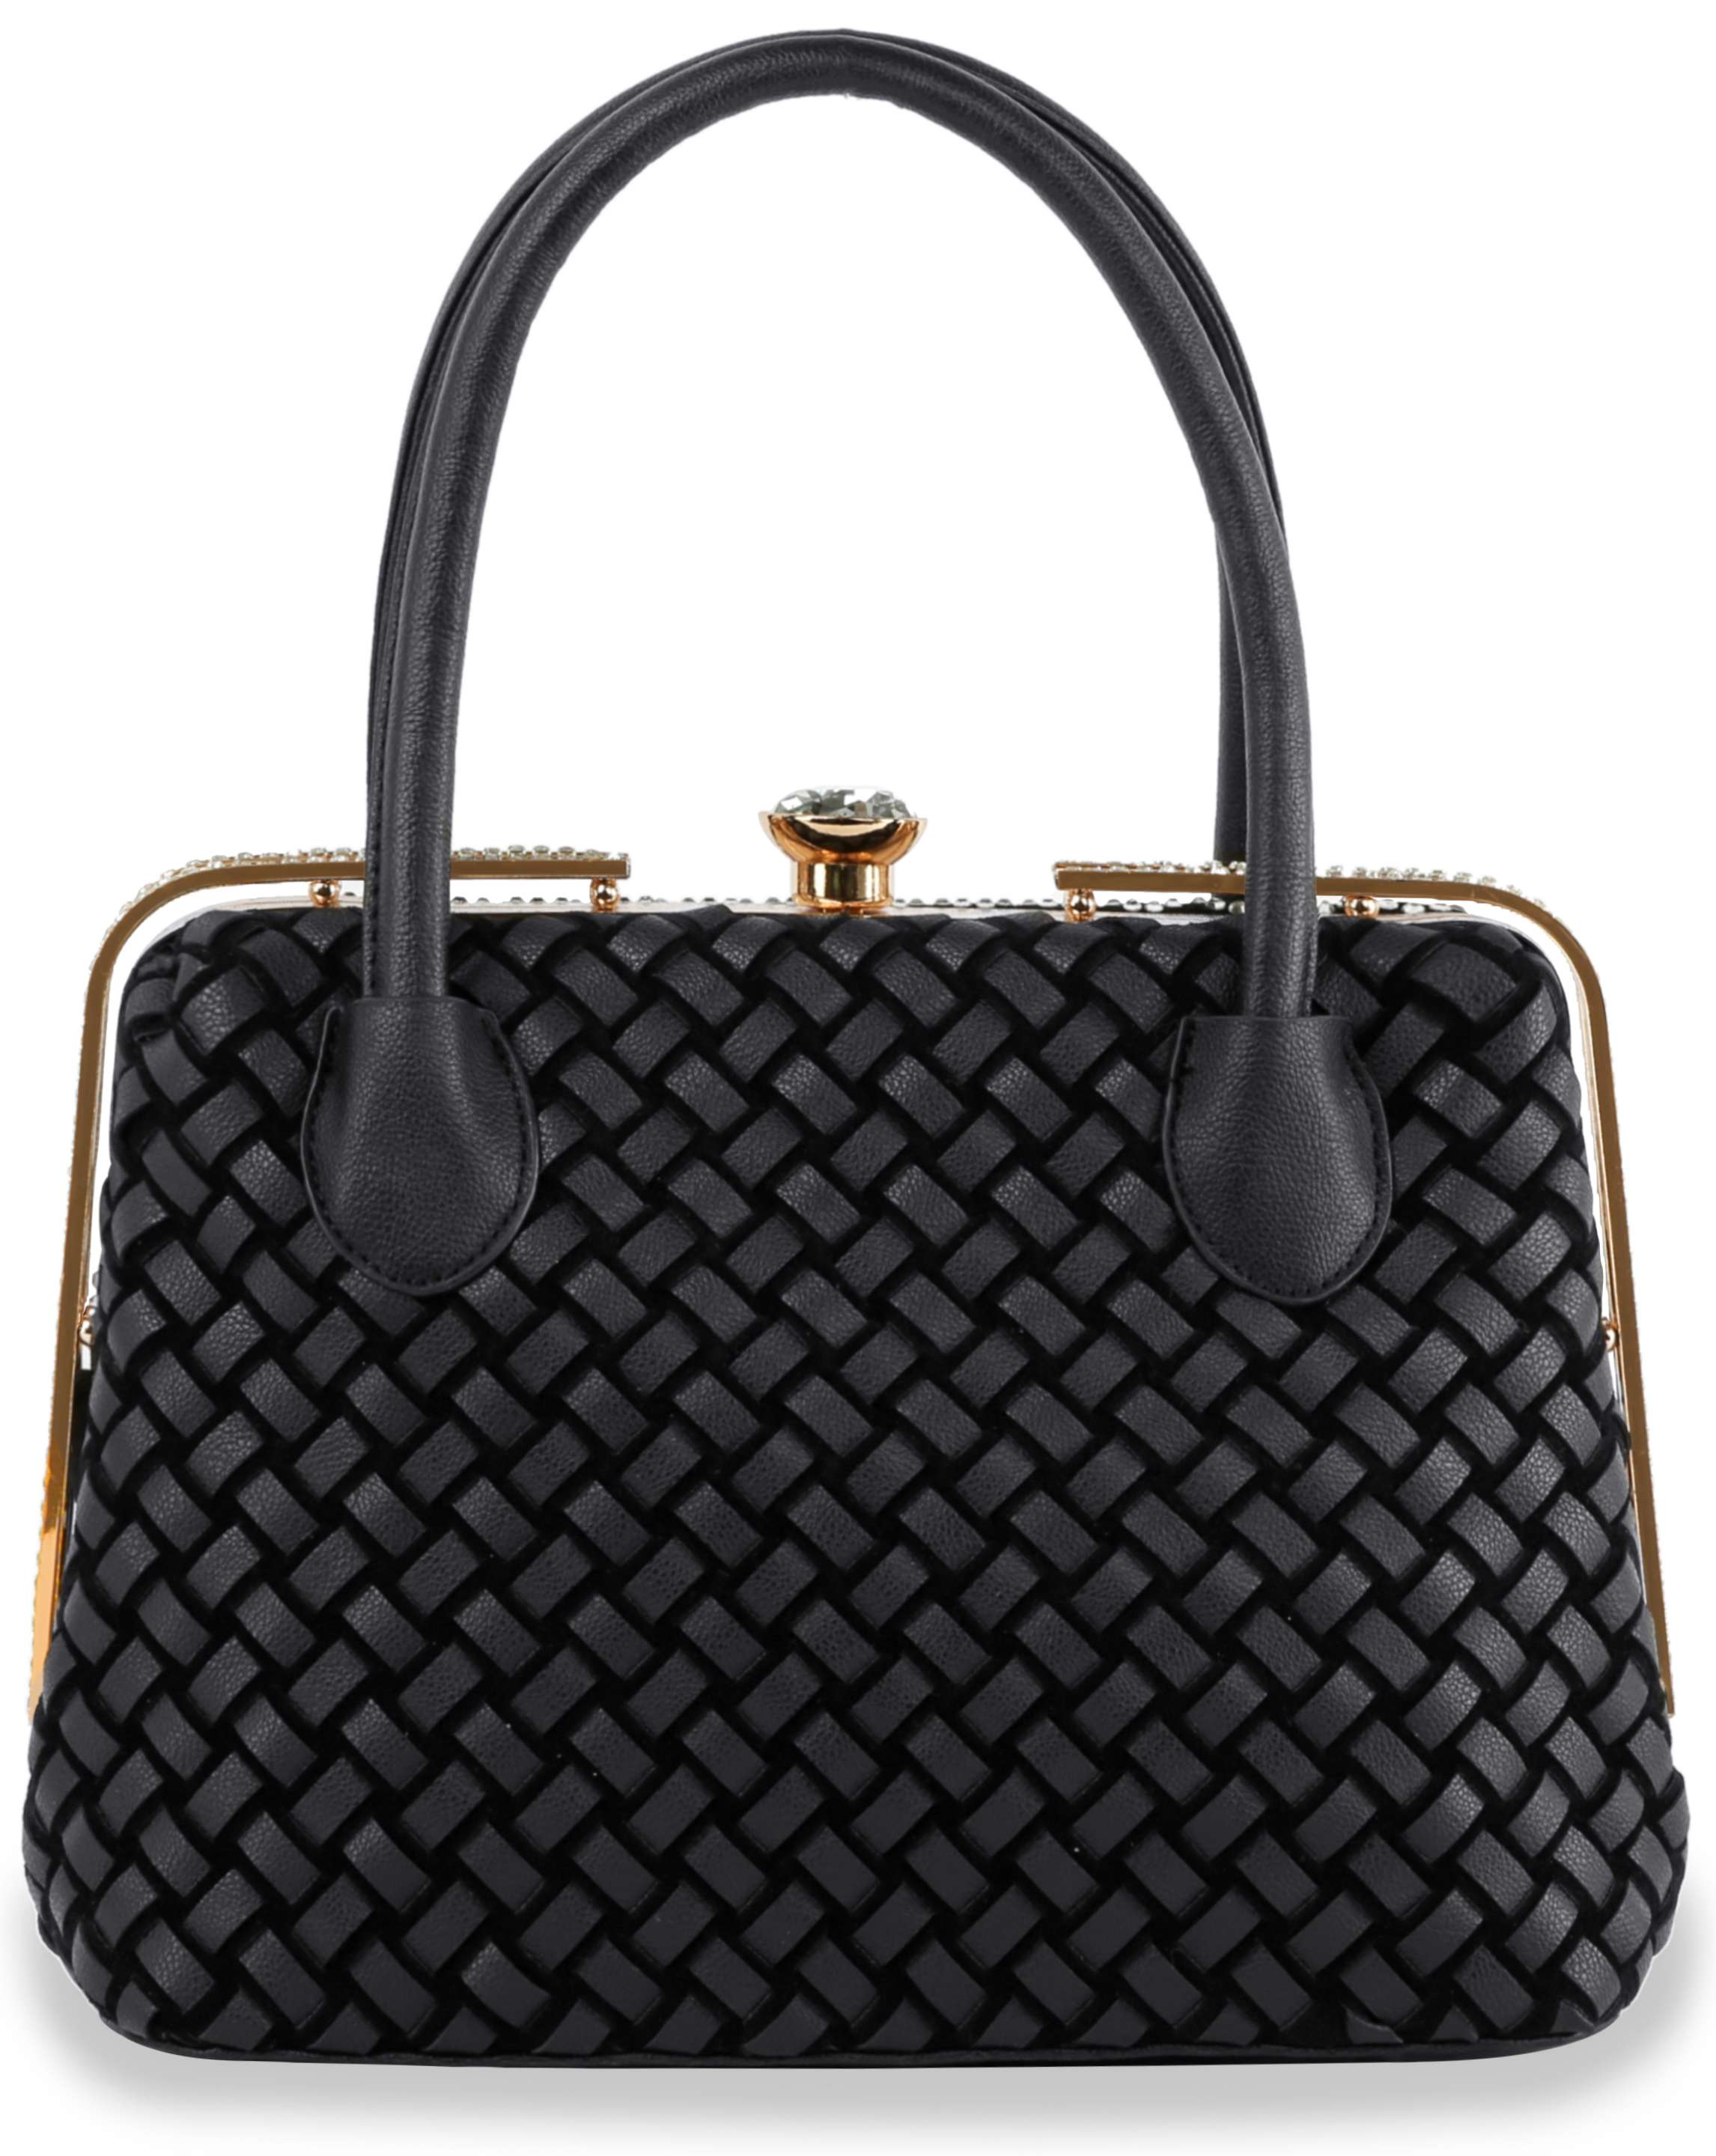 Patterned Bling Petite Hand Tote - Black